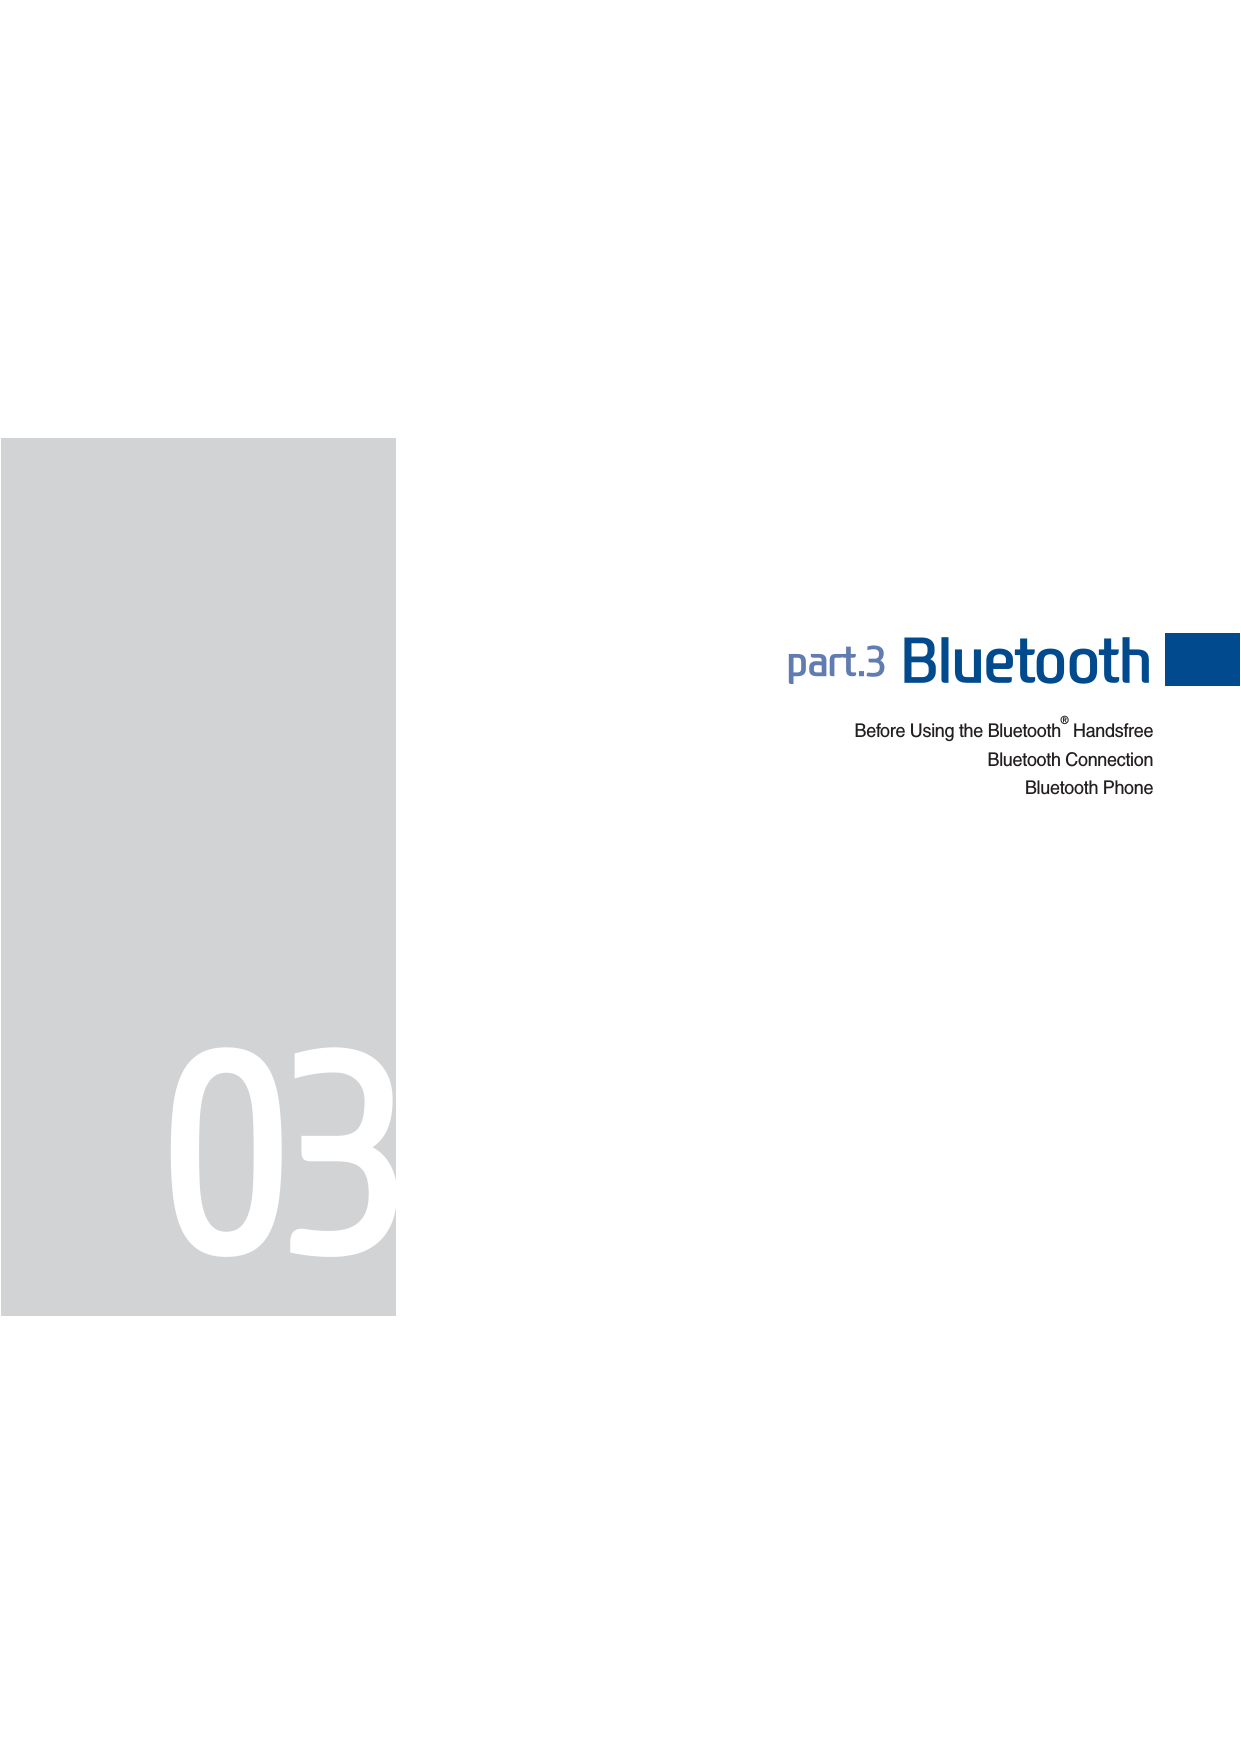 Before Using the Bluetooth® HandsfreeBluetooth ConnectionBluetooth PhoneSDUW%OXHWRRWKH_FS_G4.0[EN] Part3.indd   3-1 2015-01-21   오전 10:42:57